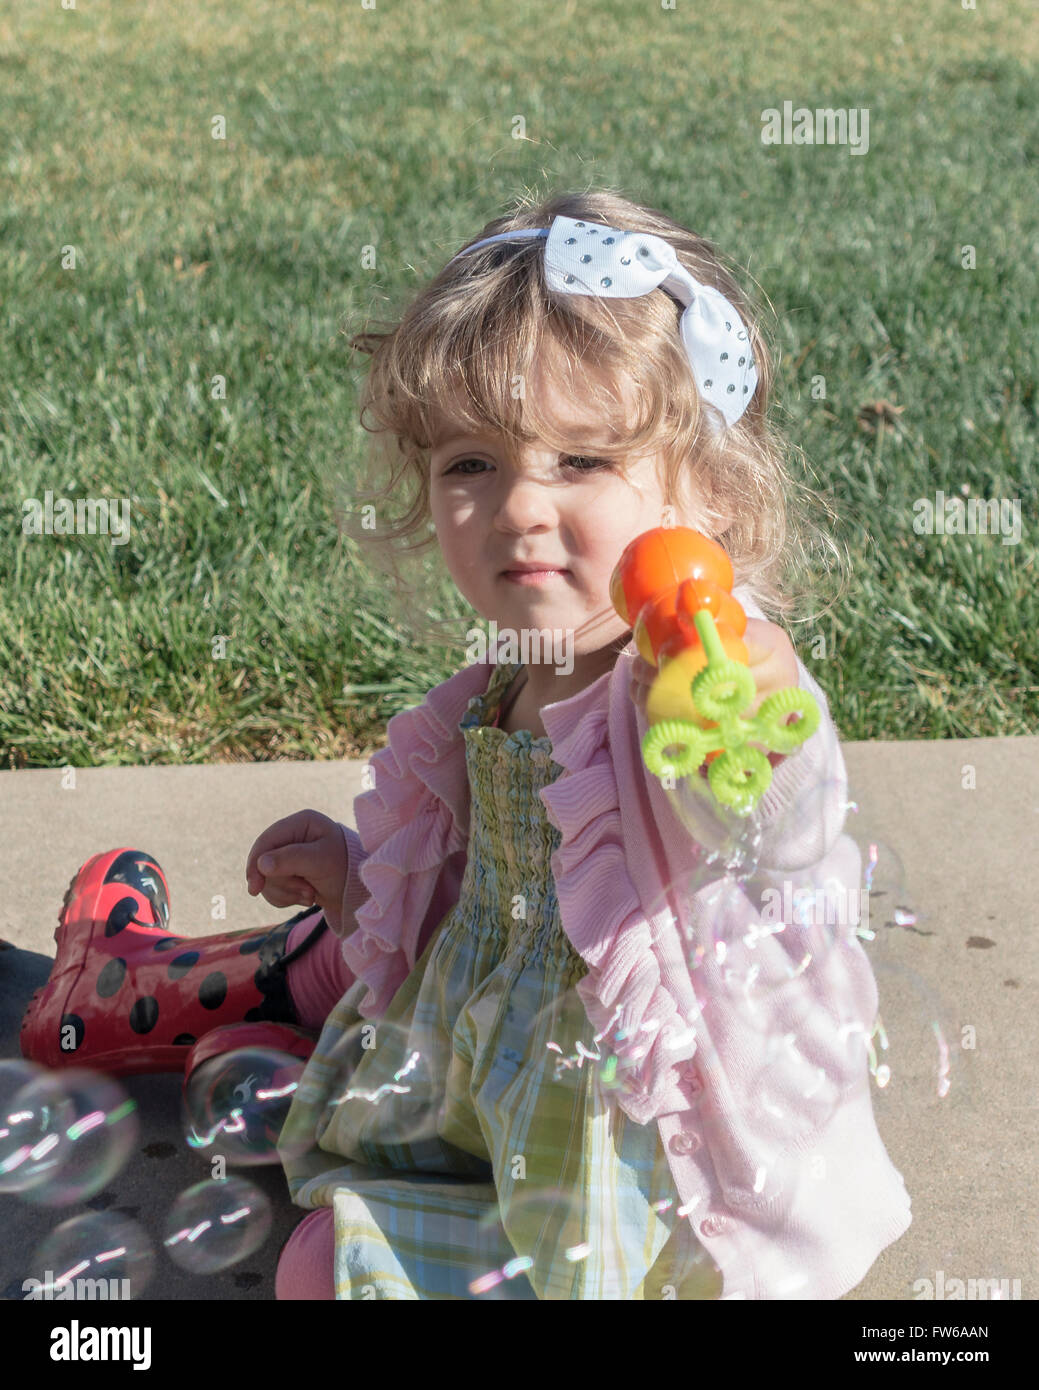 A 2 year old Caucasian toddler girl uses a toy to make soap bubbles. Stock Photo